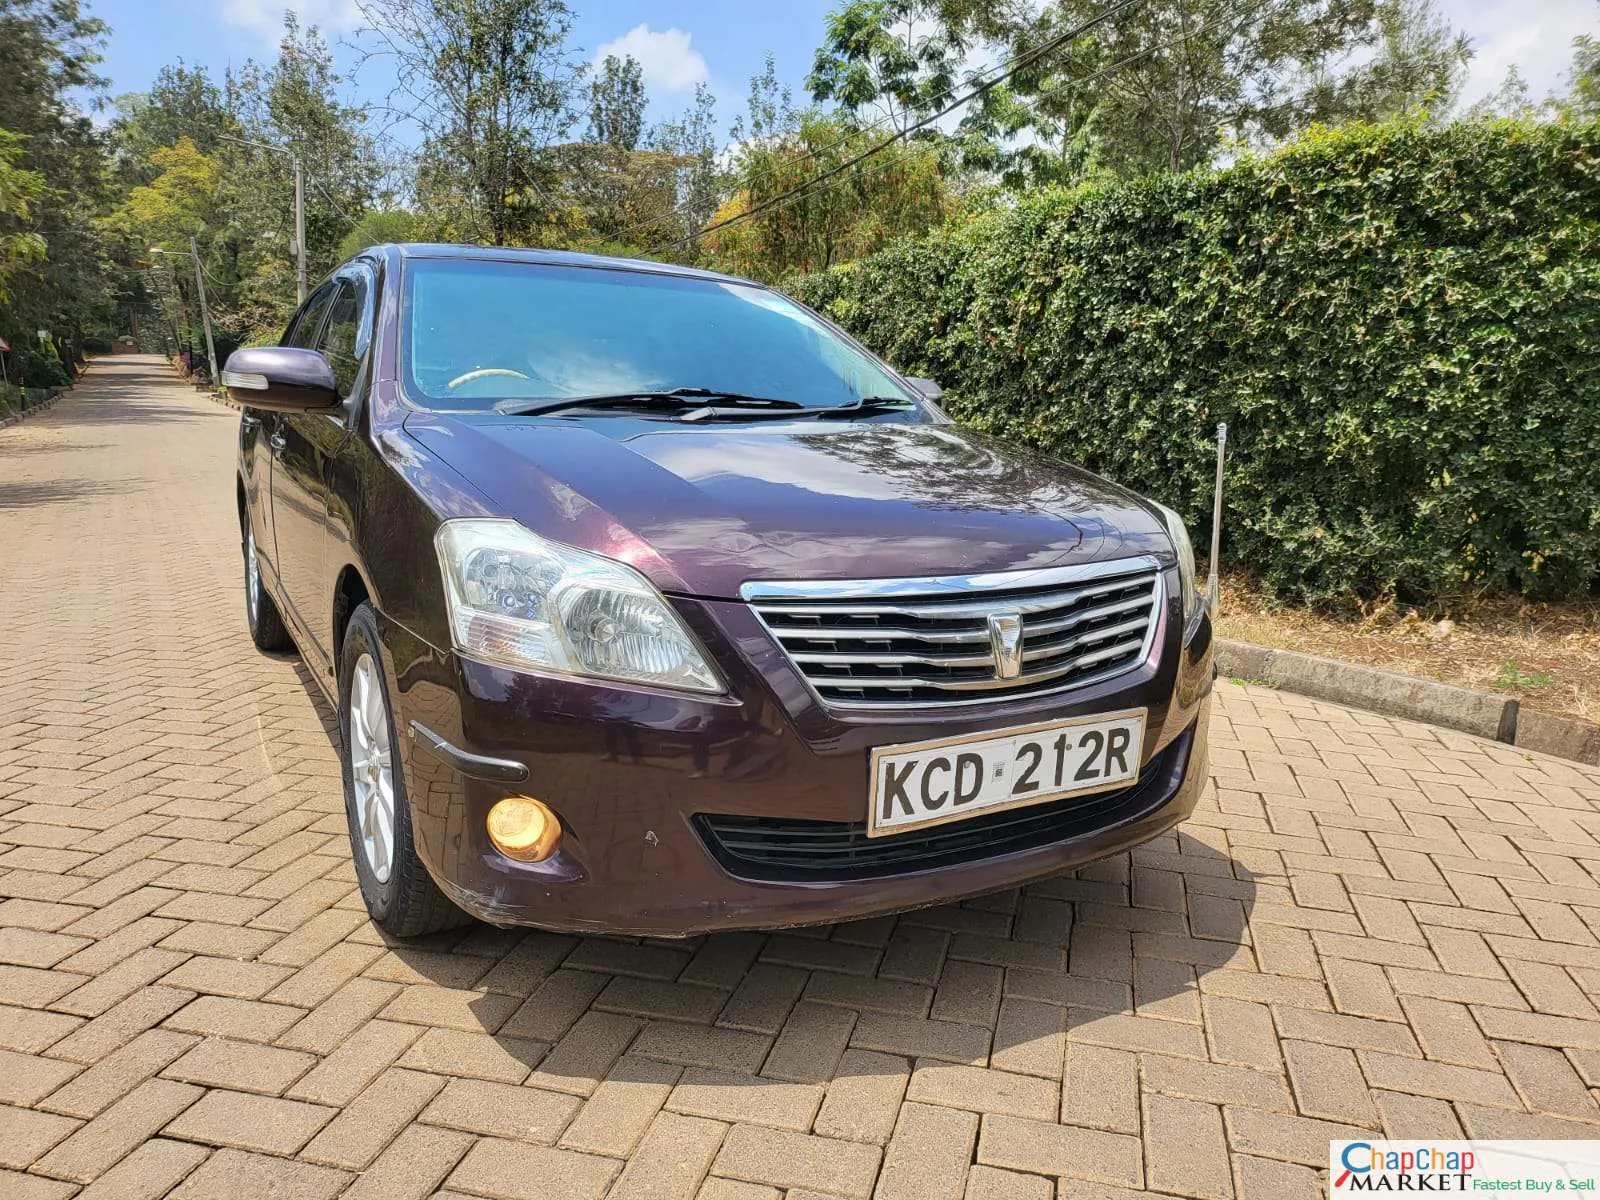 Toyota PREMIO new shape You pay 30% Deposit Trade in Ok EXCLUSIVE premio for sale in kenya hire purchase installments